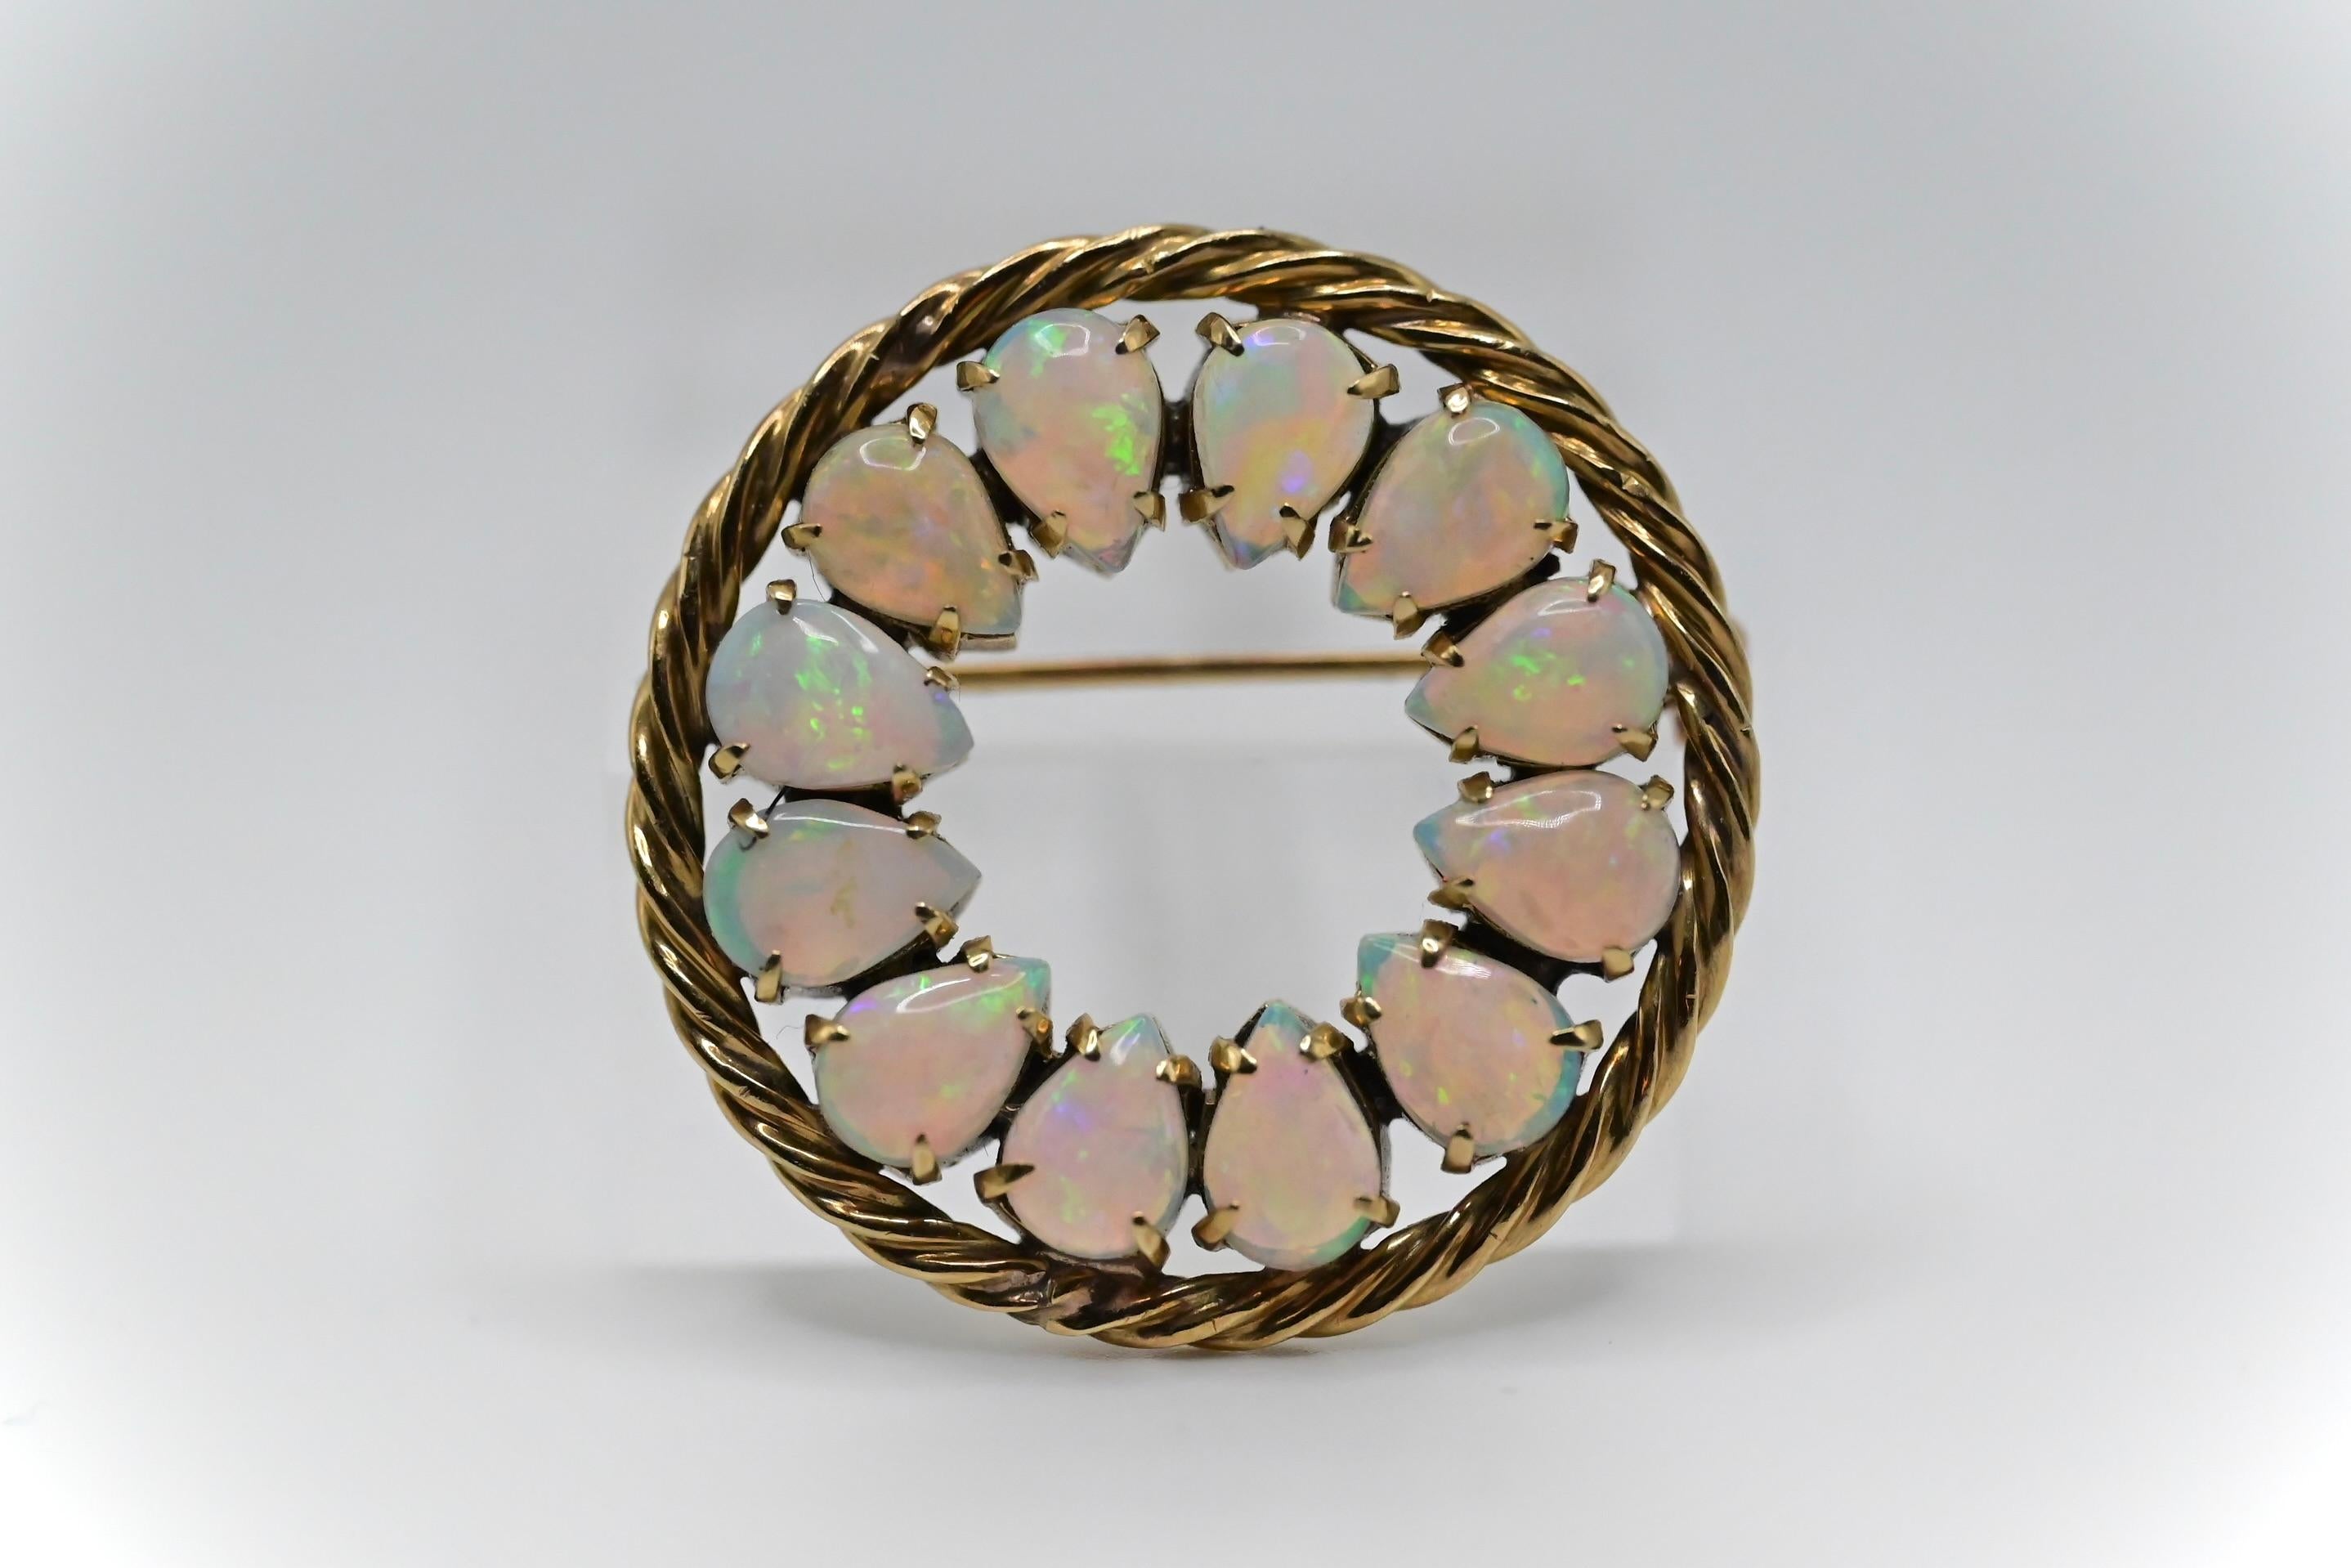 This is a gorgeous 14k yellow gold round brooch with 12 exquisite pear shaped opals placed around it. It’s in great condition with little to no signs of wear, and weighs 9 grams. The length and height of the brooch is 1 inch 2/8, and it’s about 4mm